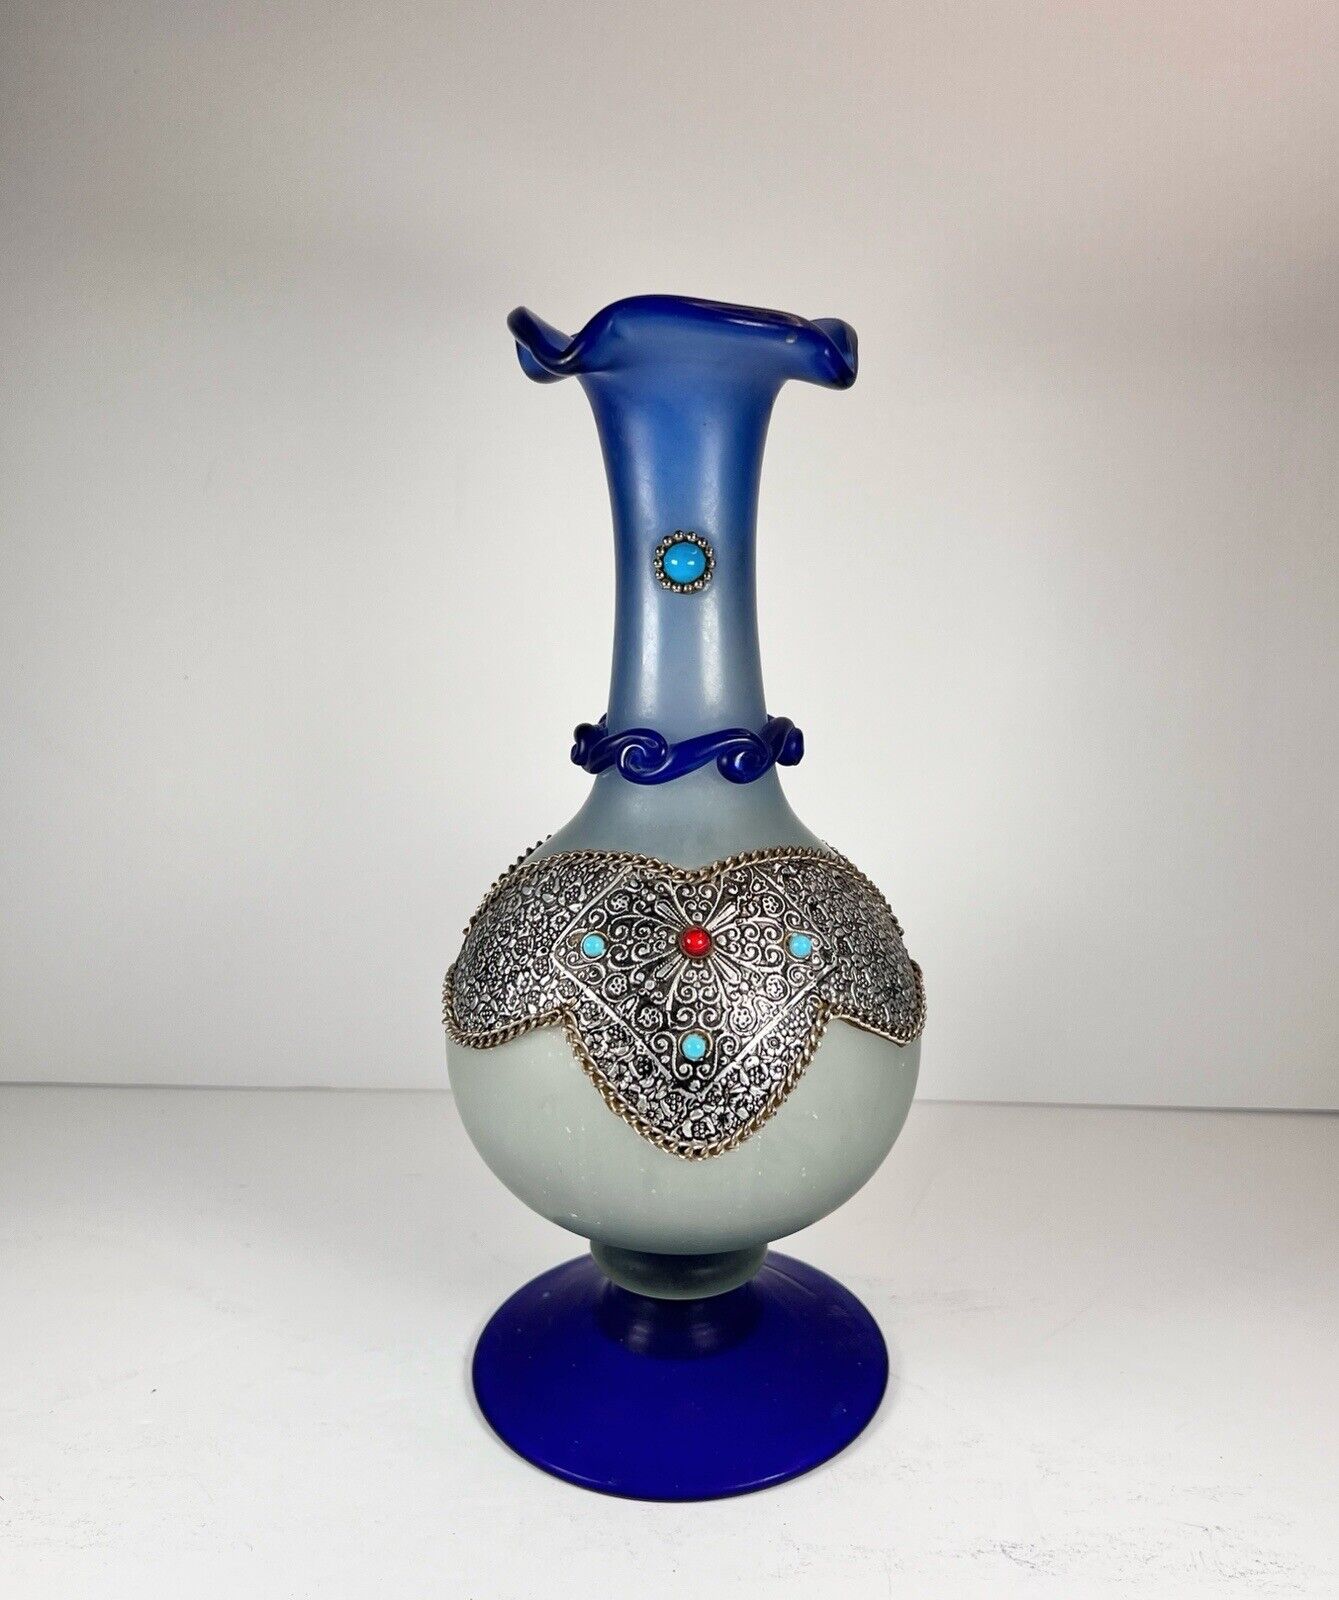 Vintage Colbalt Hand Blown Glass Vase With Silver Filigree And Turquoise Gems